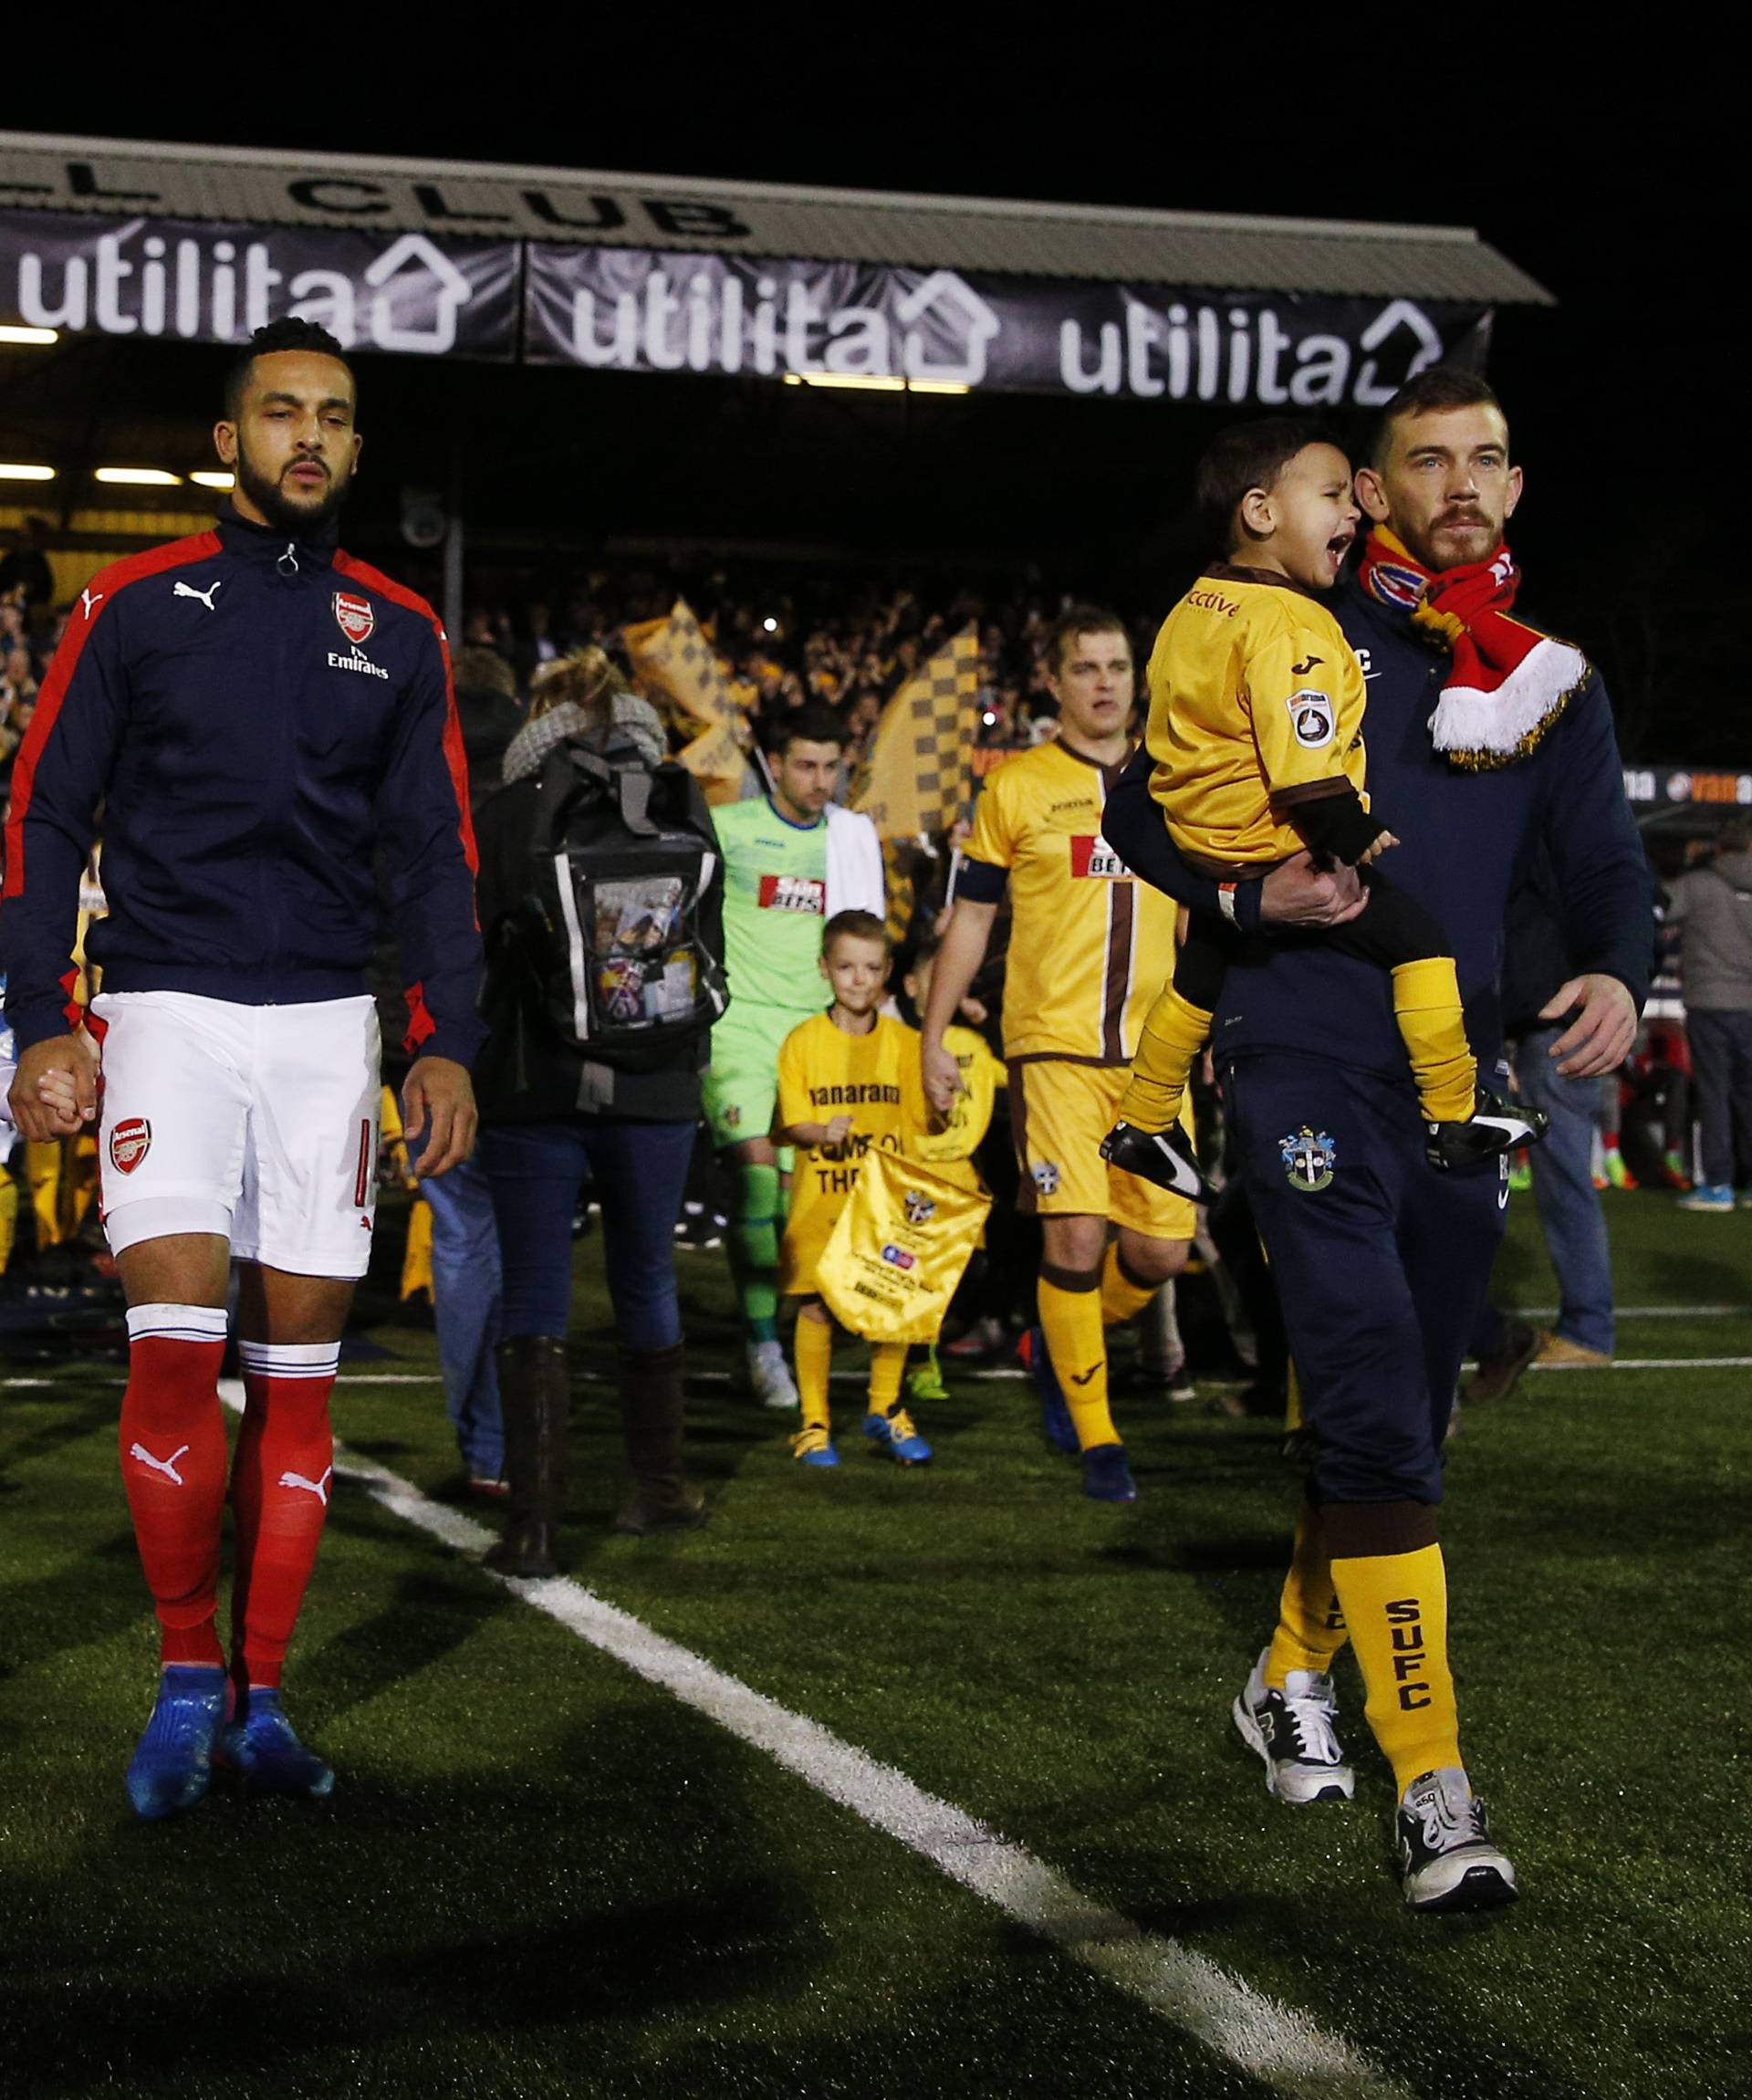 Arsenal's Theo Walcott and Sutton United's Jamie Collins lead out their teams before the match